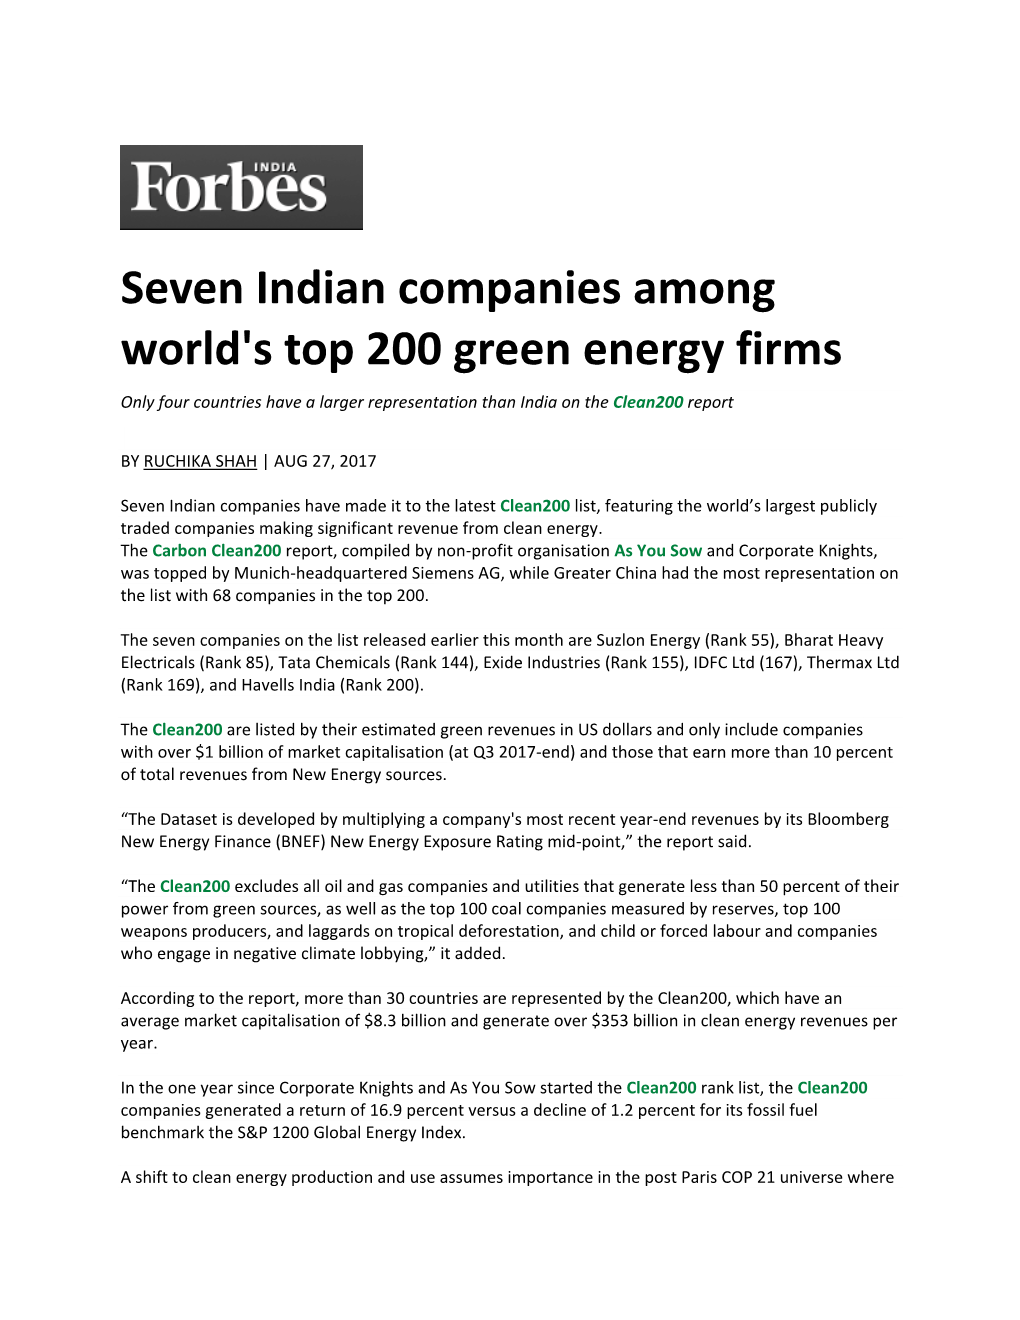 Seven Indian Companies Among World's Top 200 Green Energy Firms Only Four Countries Have a Larger Representation Than India on the Clean200 Report